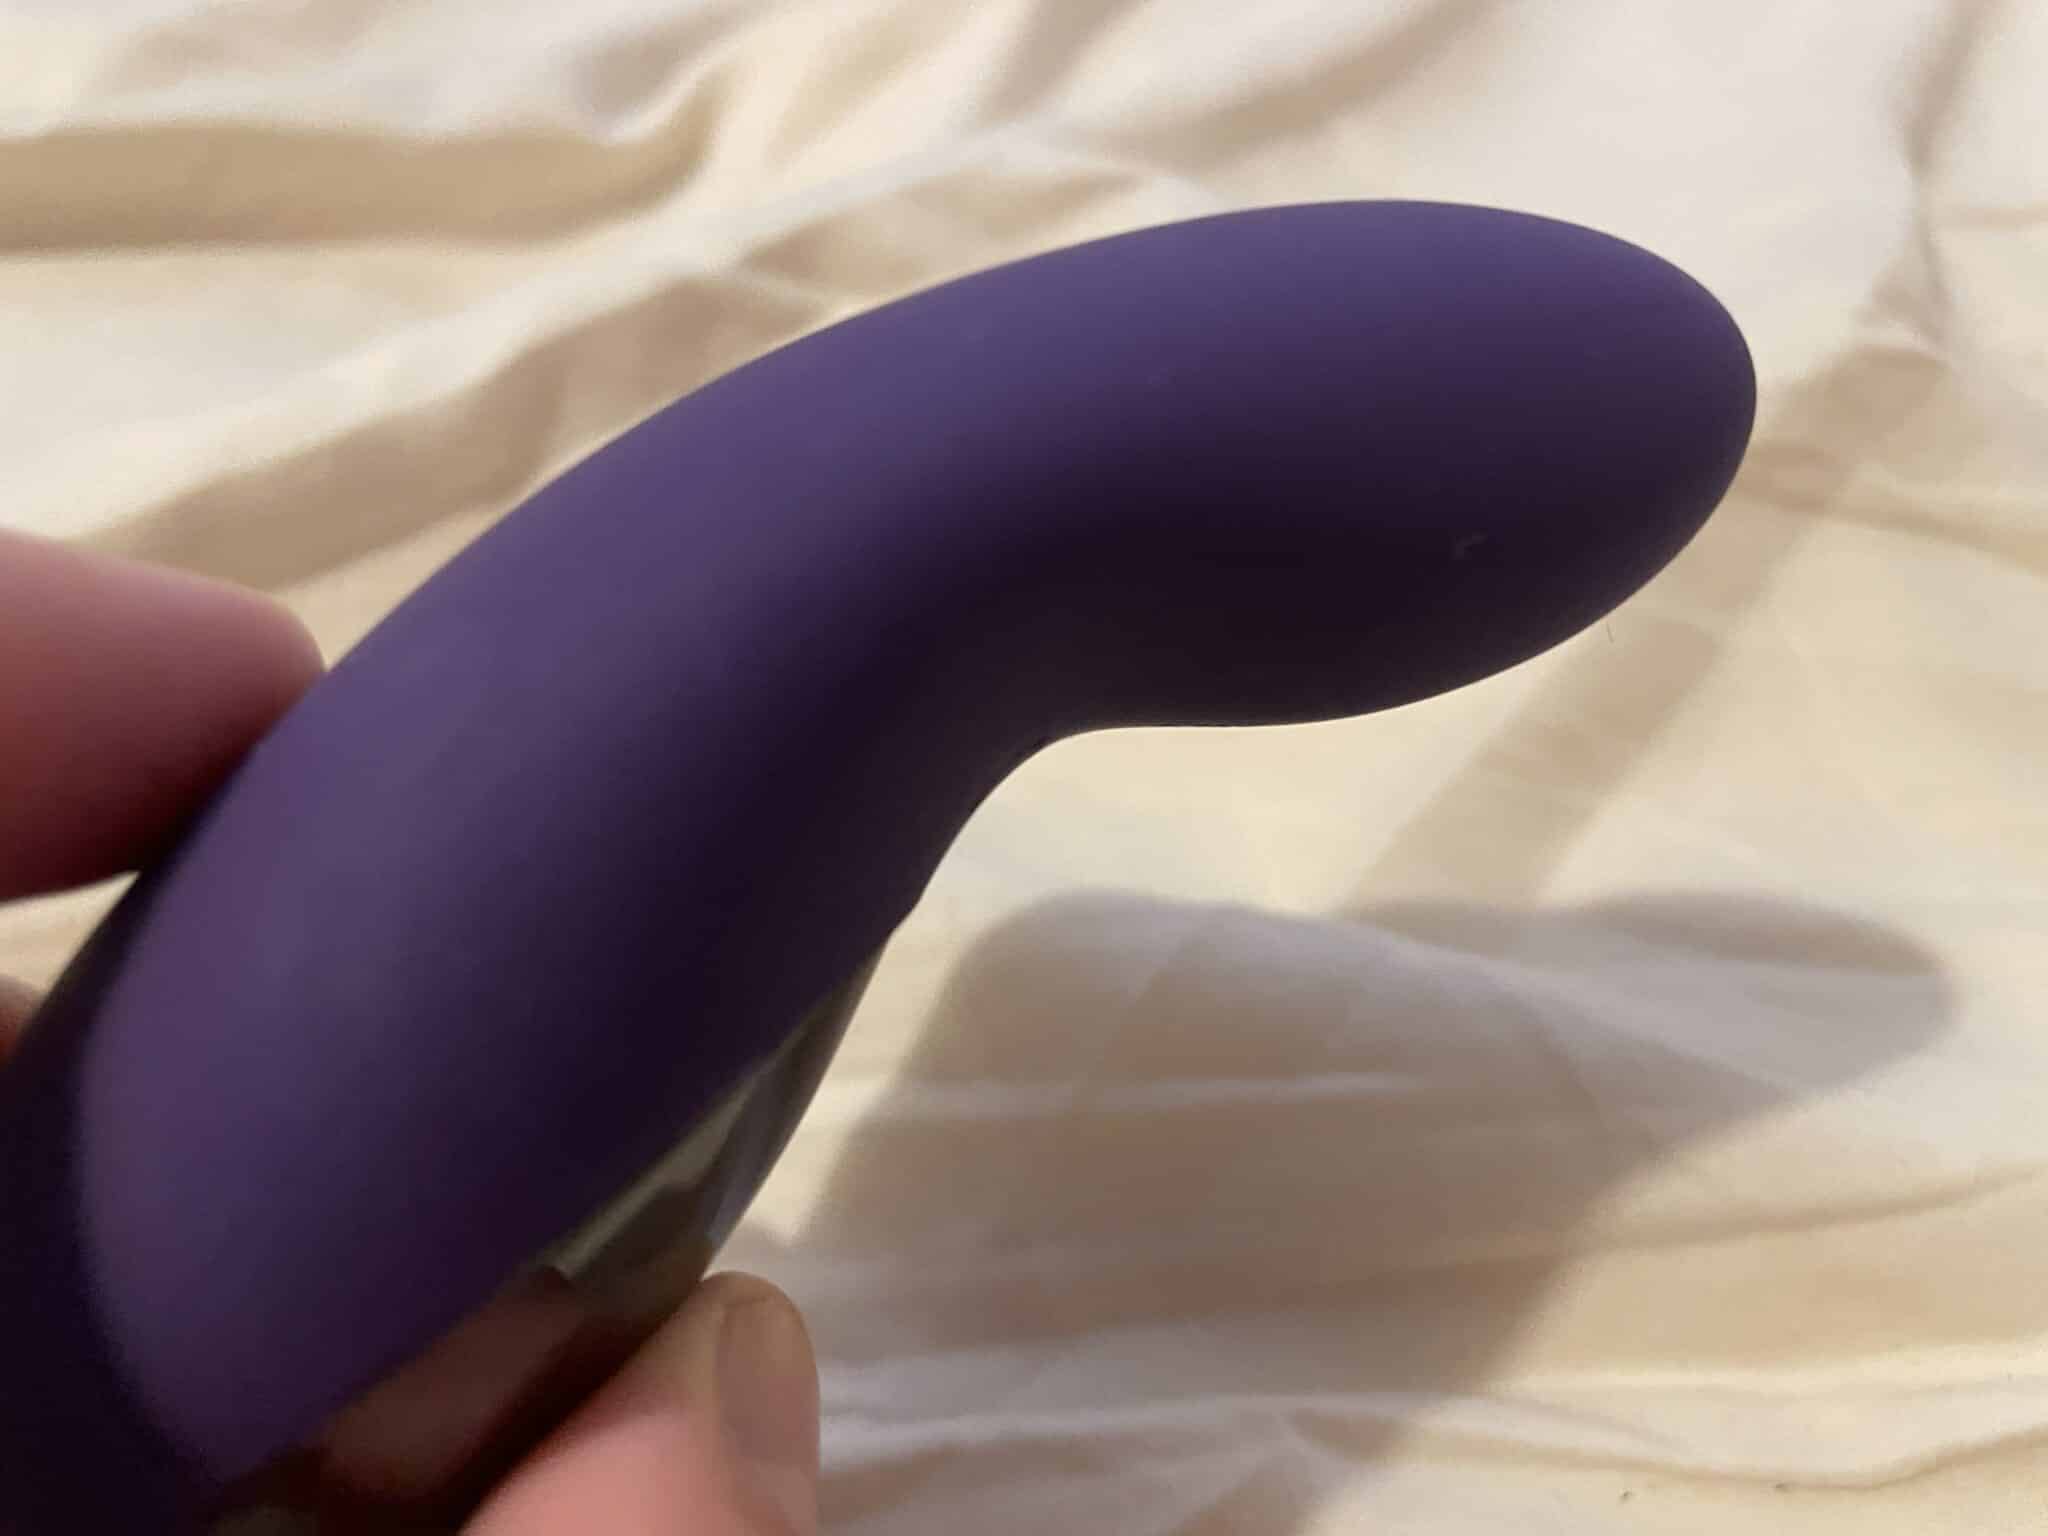 Lovehoney Desire Luxury Clitoral Vibrator Is the Lovehoney Desire Luxury Rechargeable Clitoral Vibrator a quality sex toy?